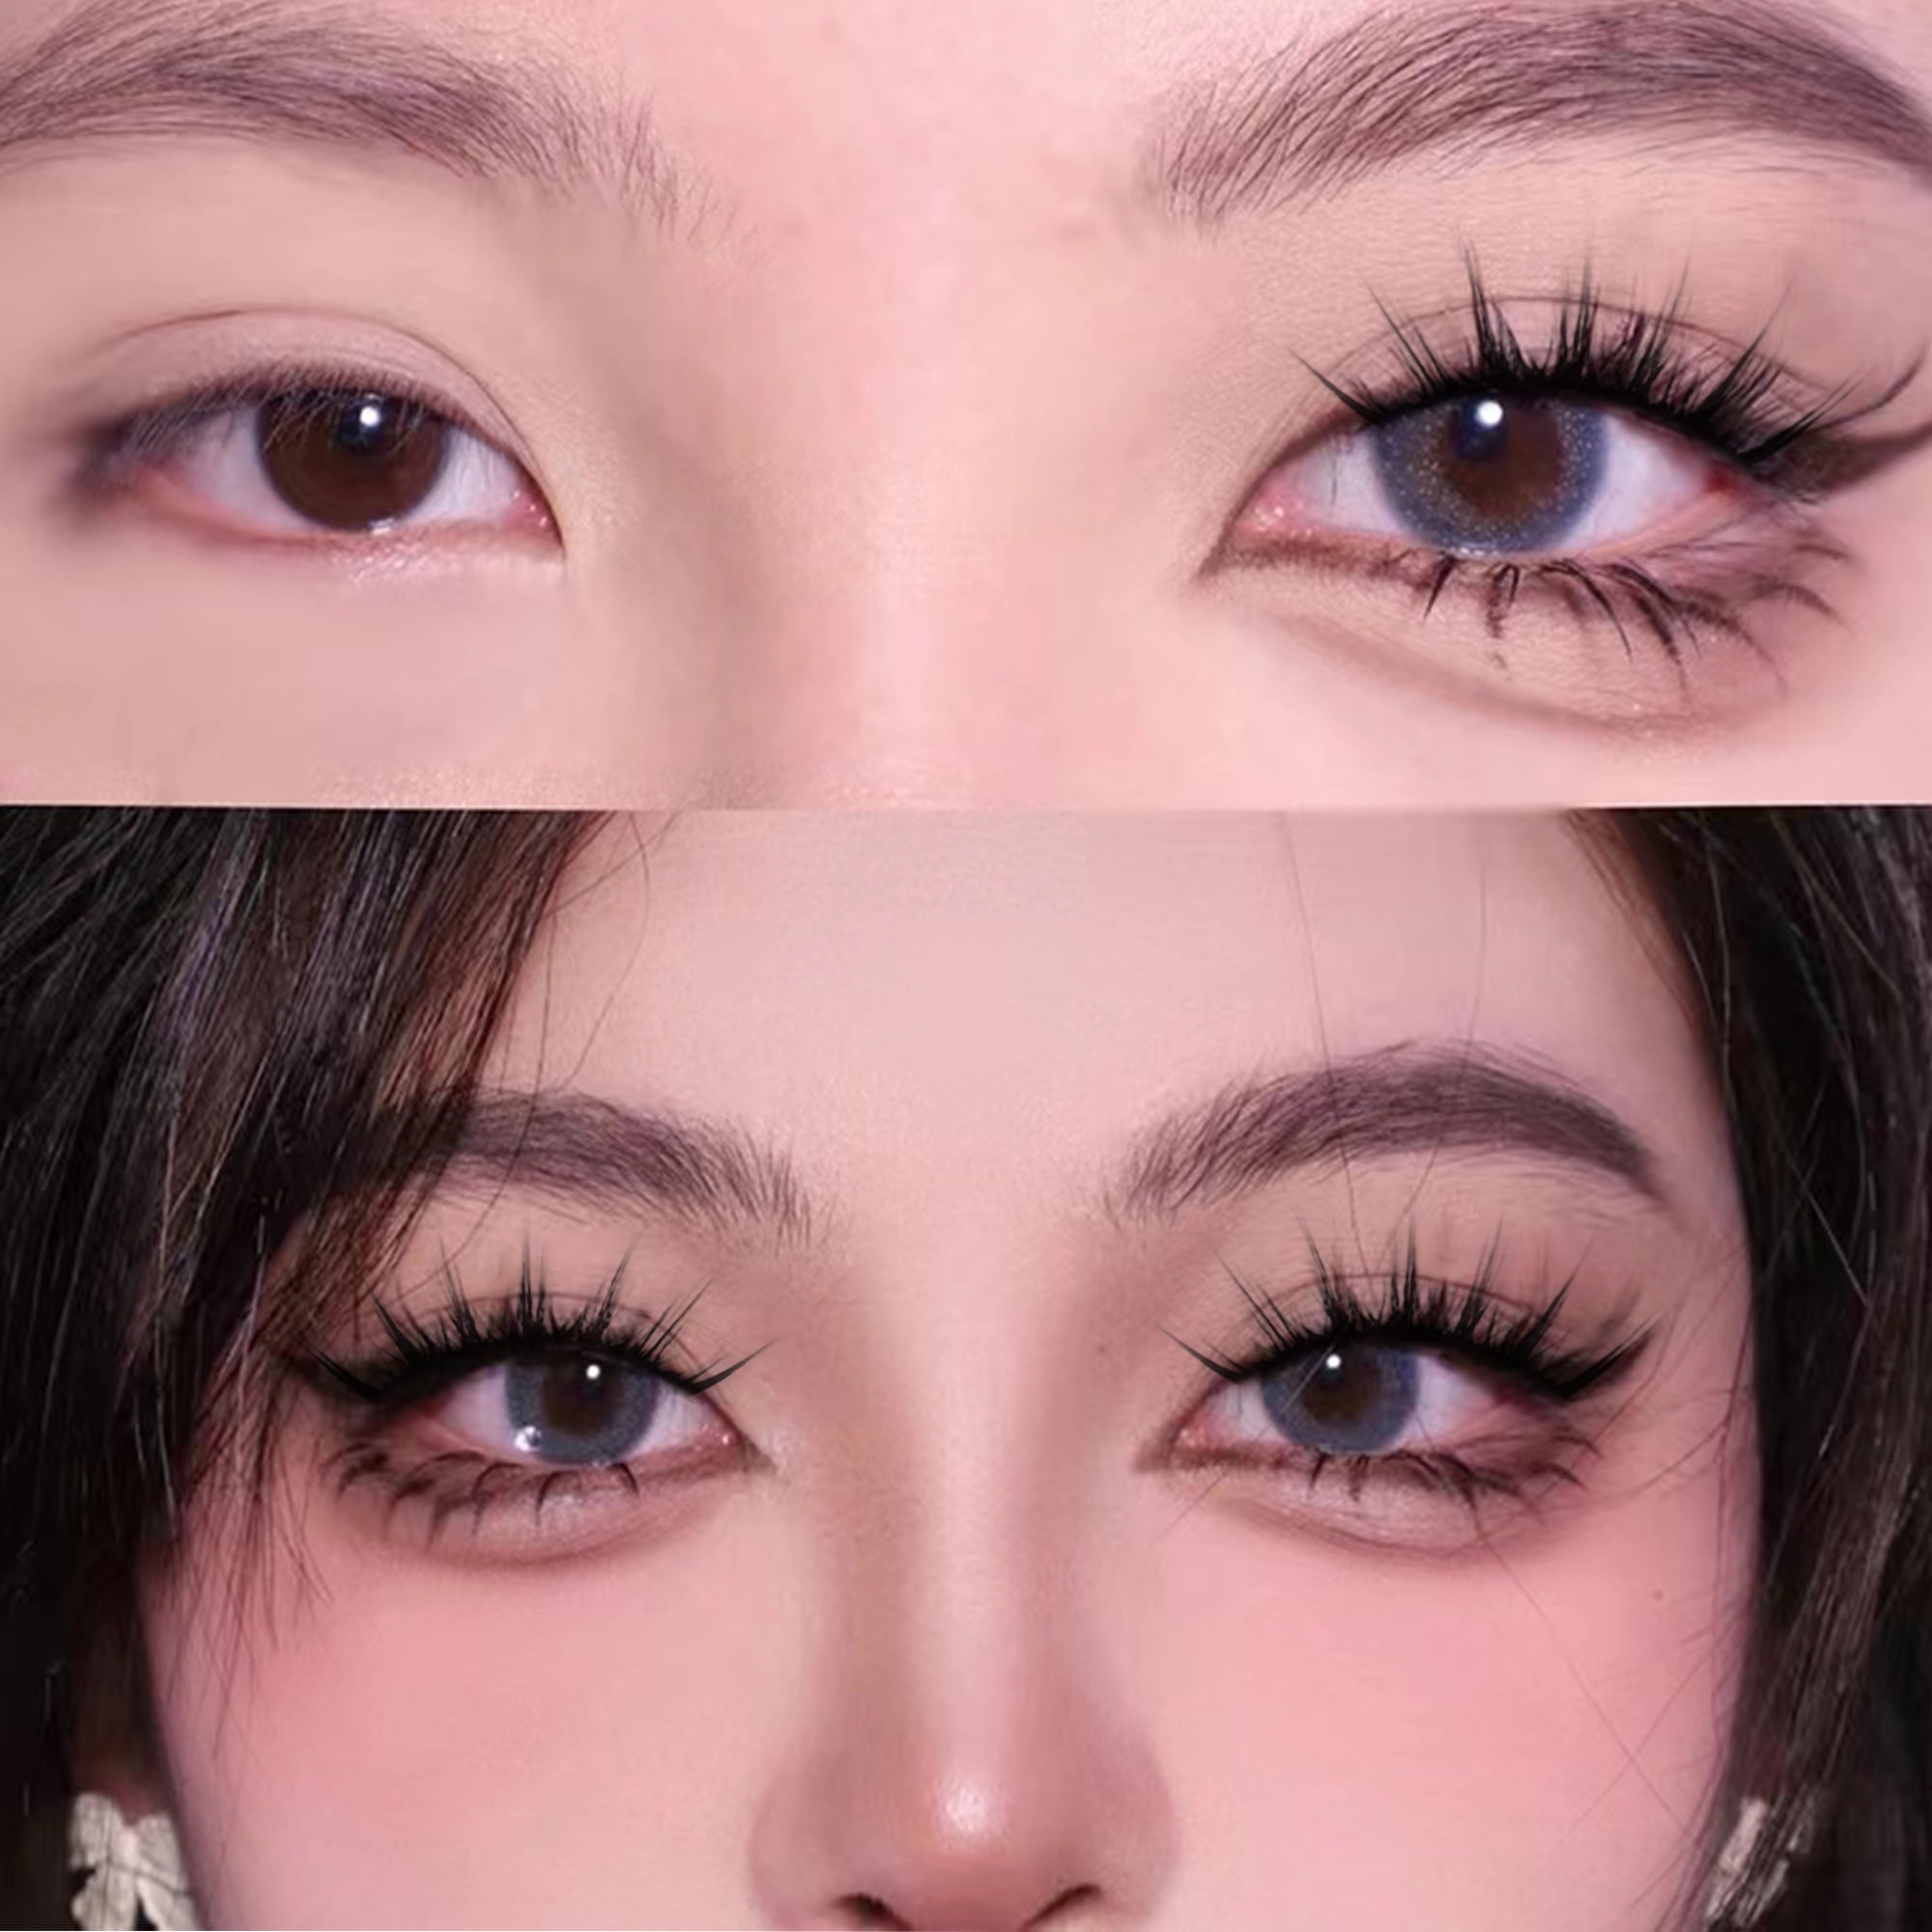  Manga Lashes Natural Look Japanese Anime Lashes Korean Asian  Wispy Spiky Lashes with Clear Band Short Fake Eyelash 10 Pairs Pack by  outopen : Beauty & Personal Care